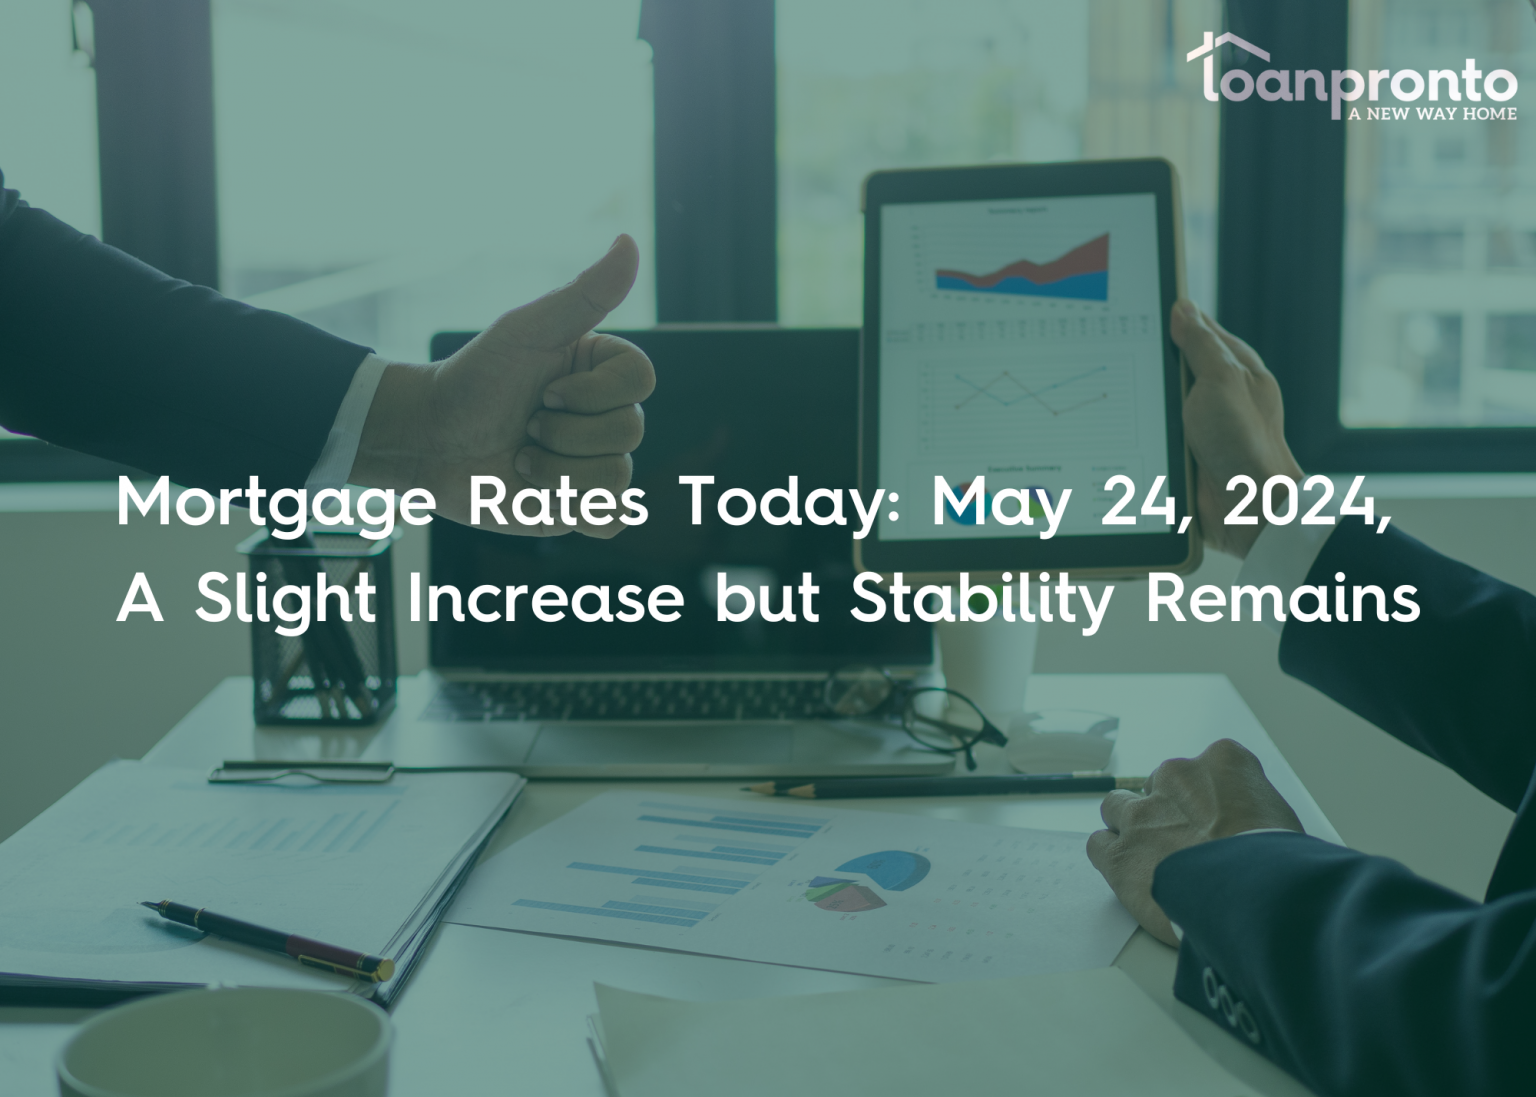 Mortgage rates show a slight increase but remain stable indicating a typical change in the market